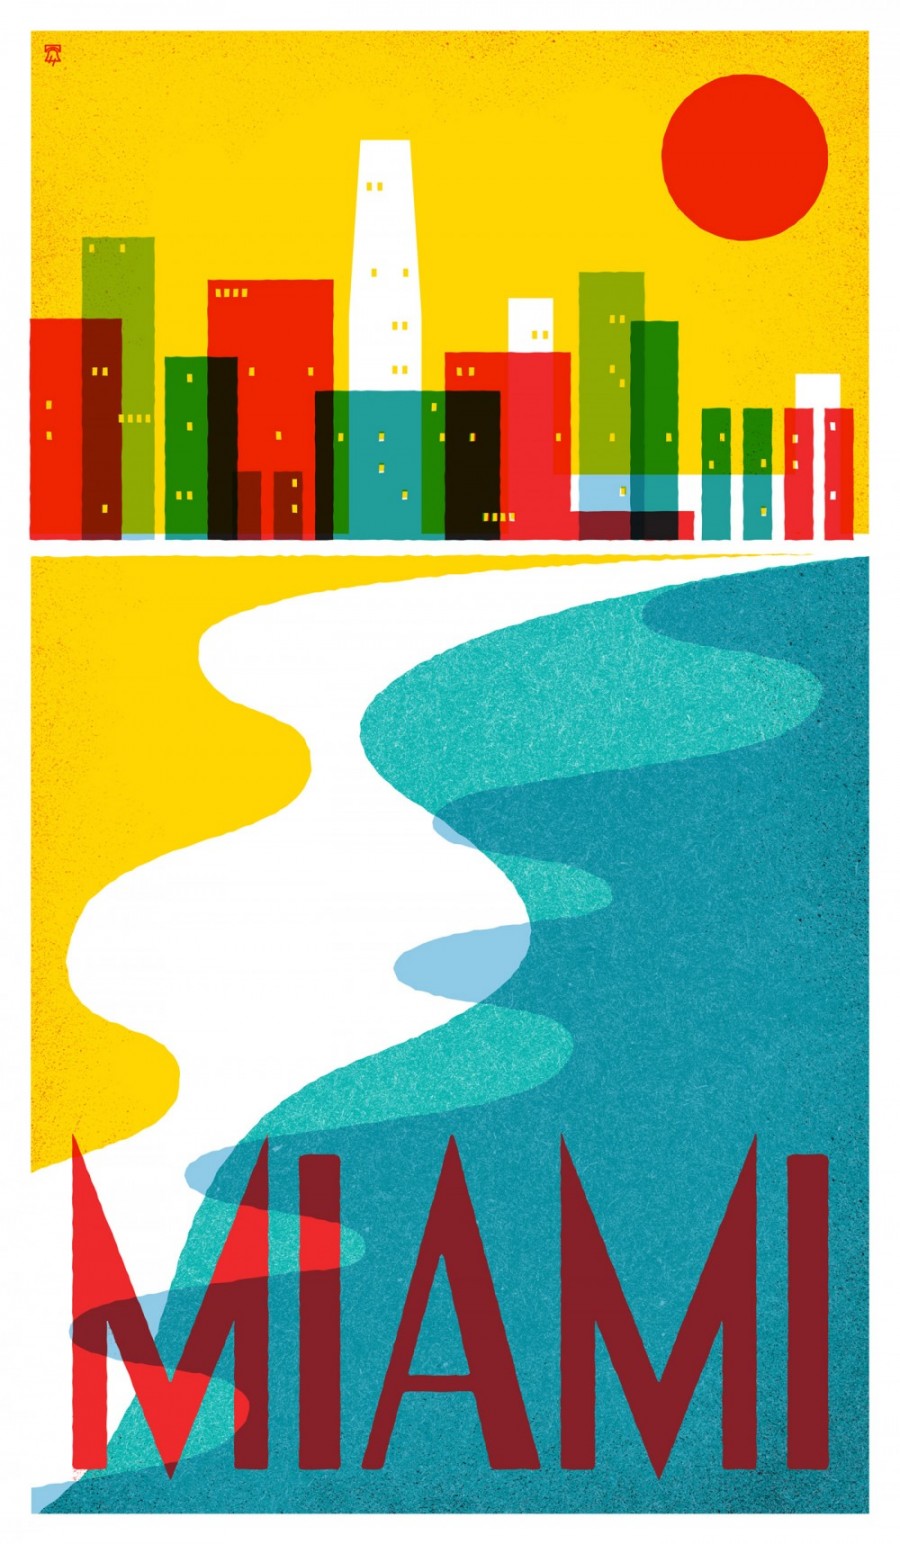 Miami, Florida - Travel Poster Series - The Heads of State